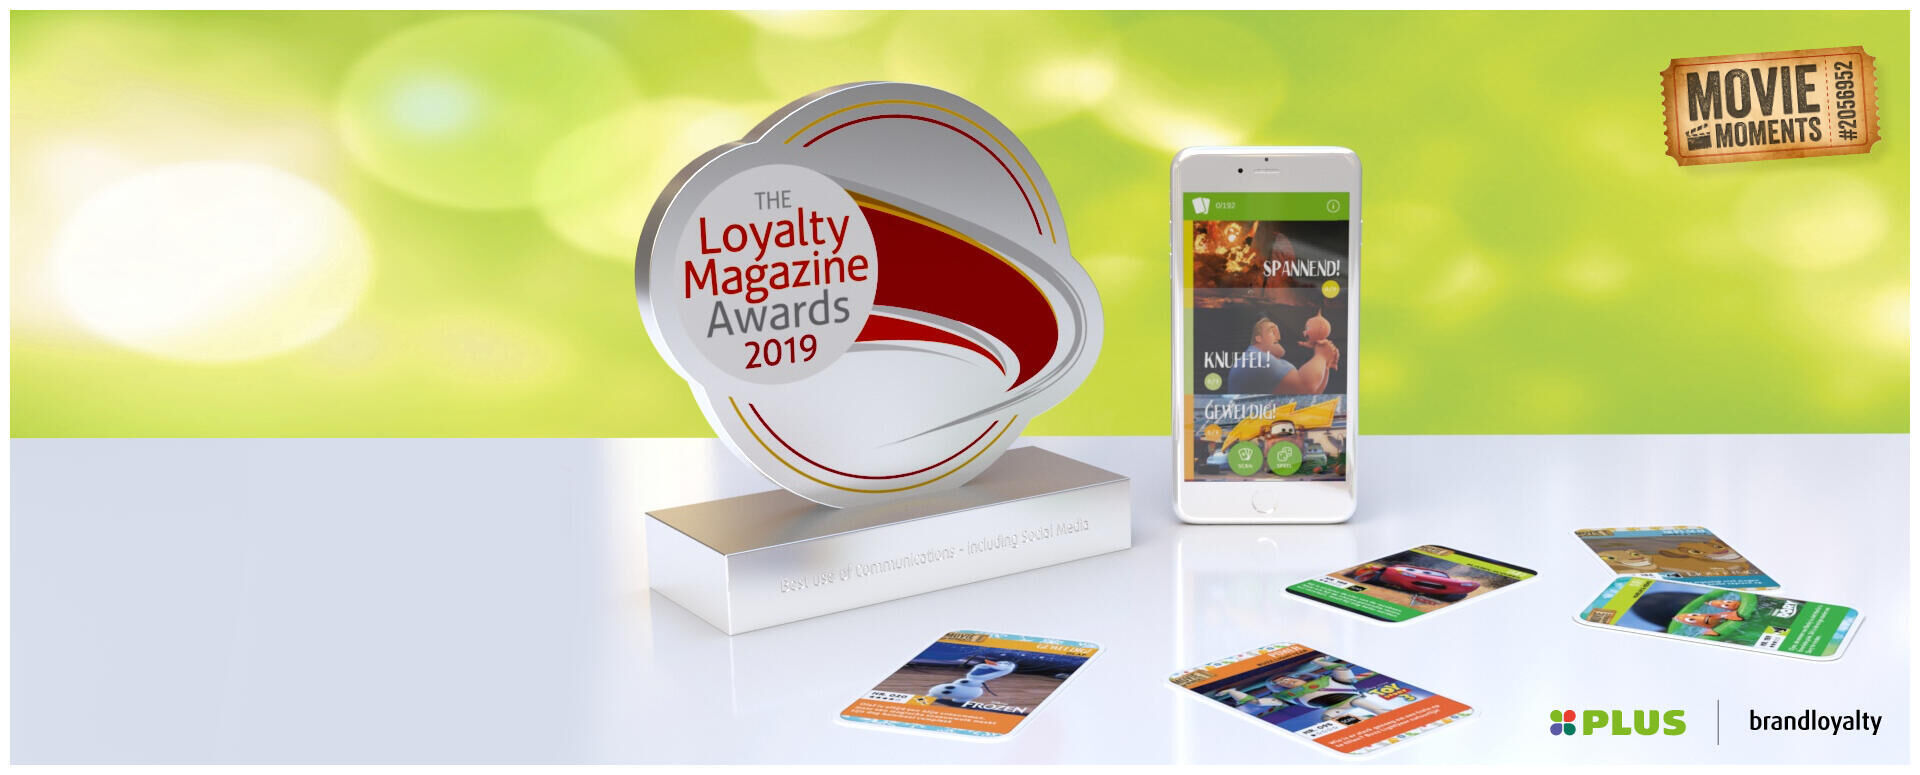 Disney Movie Moment&#39;s programme honoured at the&nbsp;Loyalty Magazine Awards